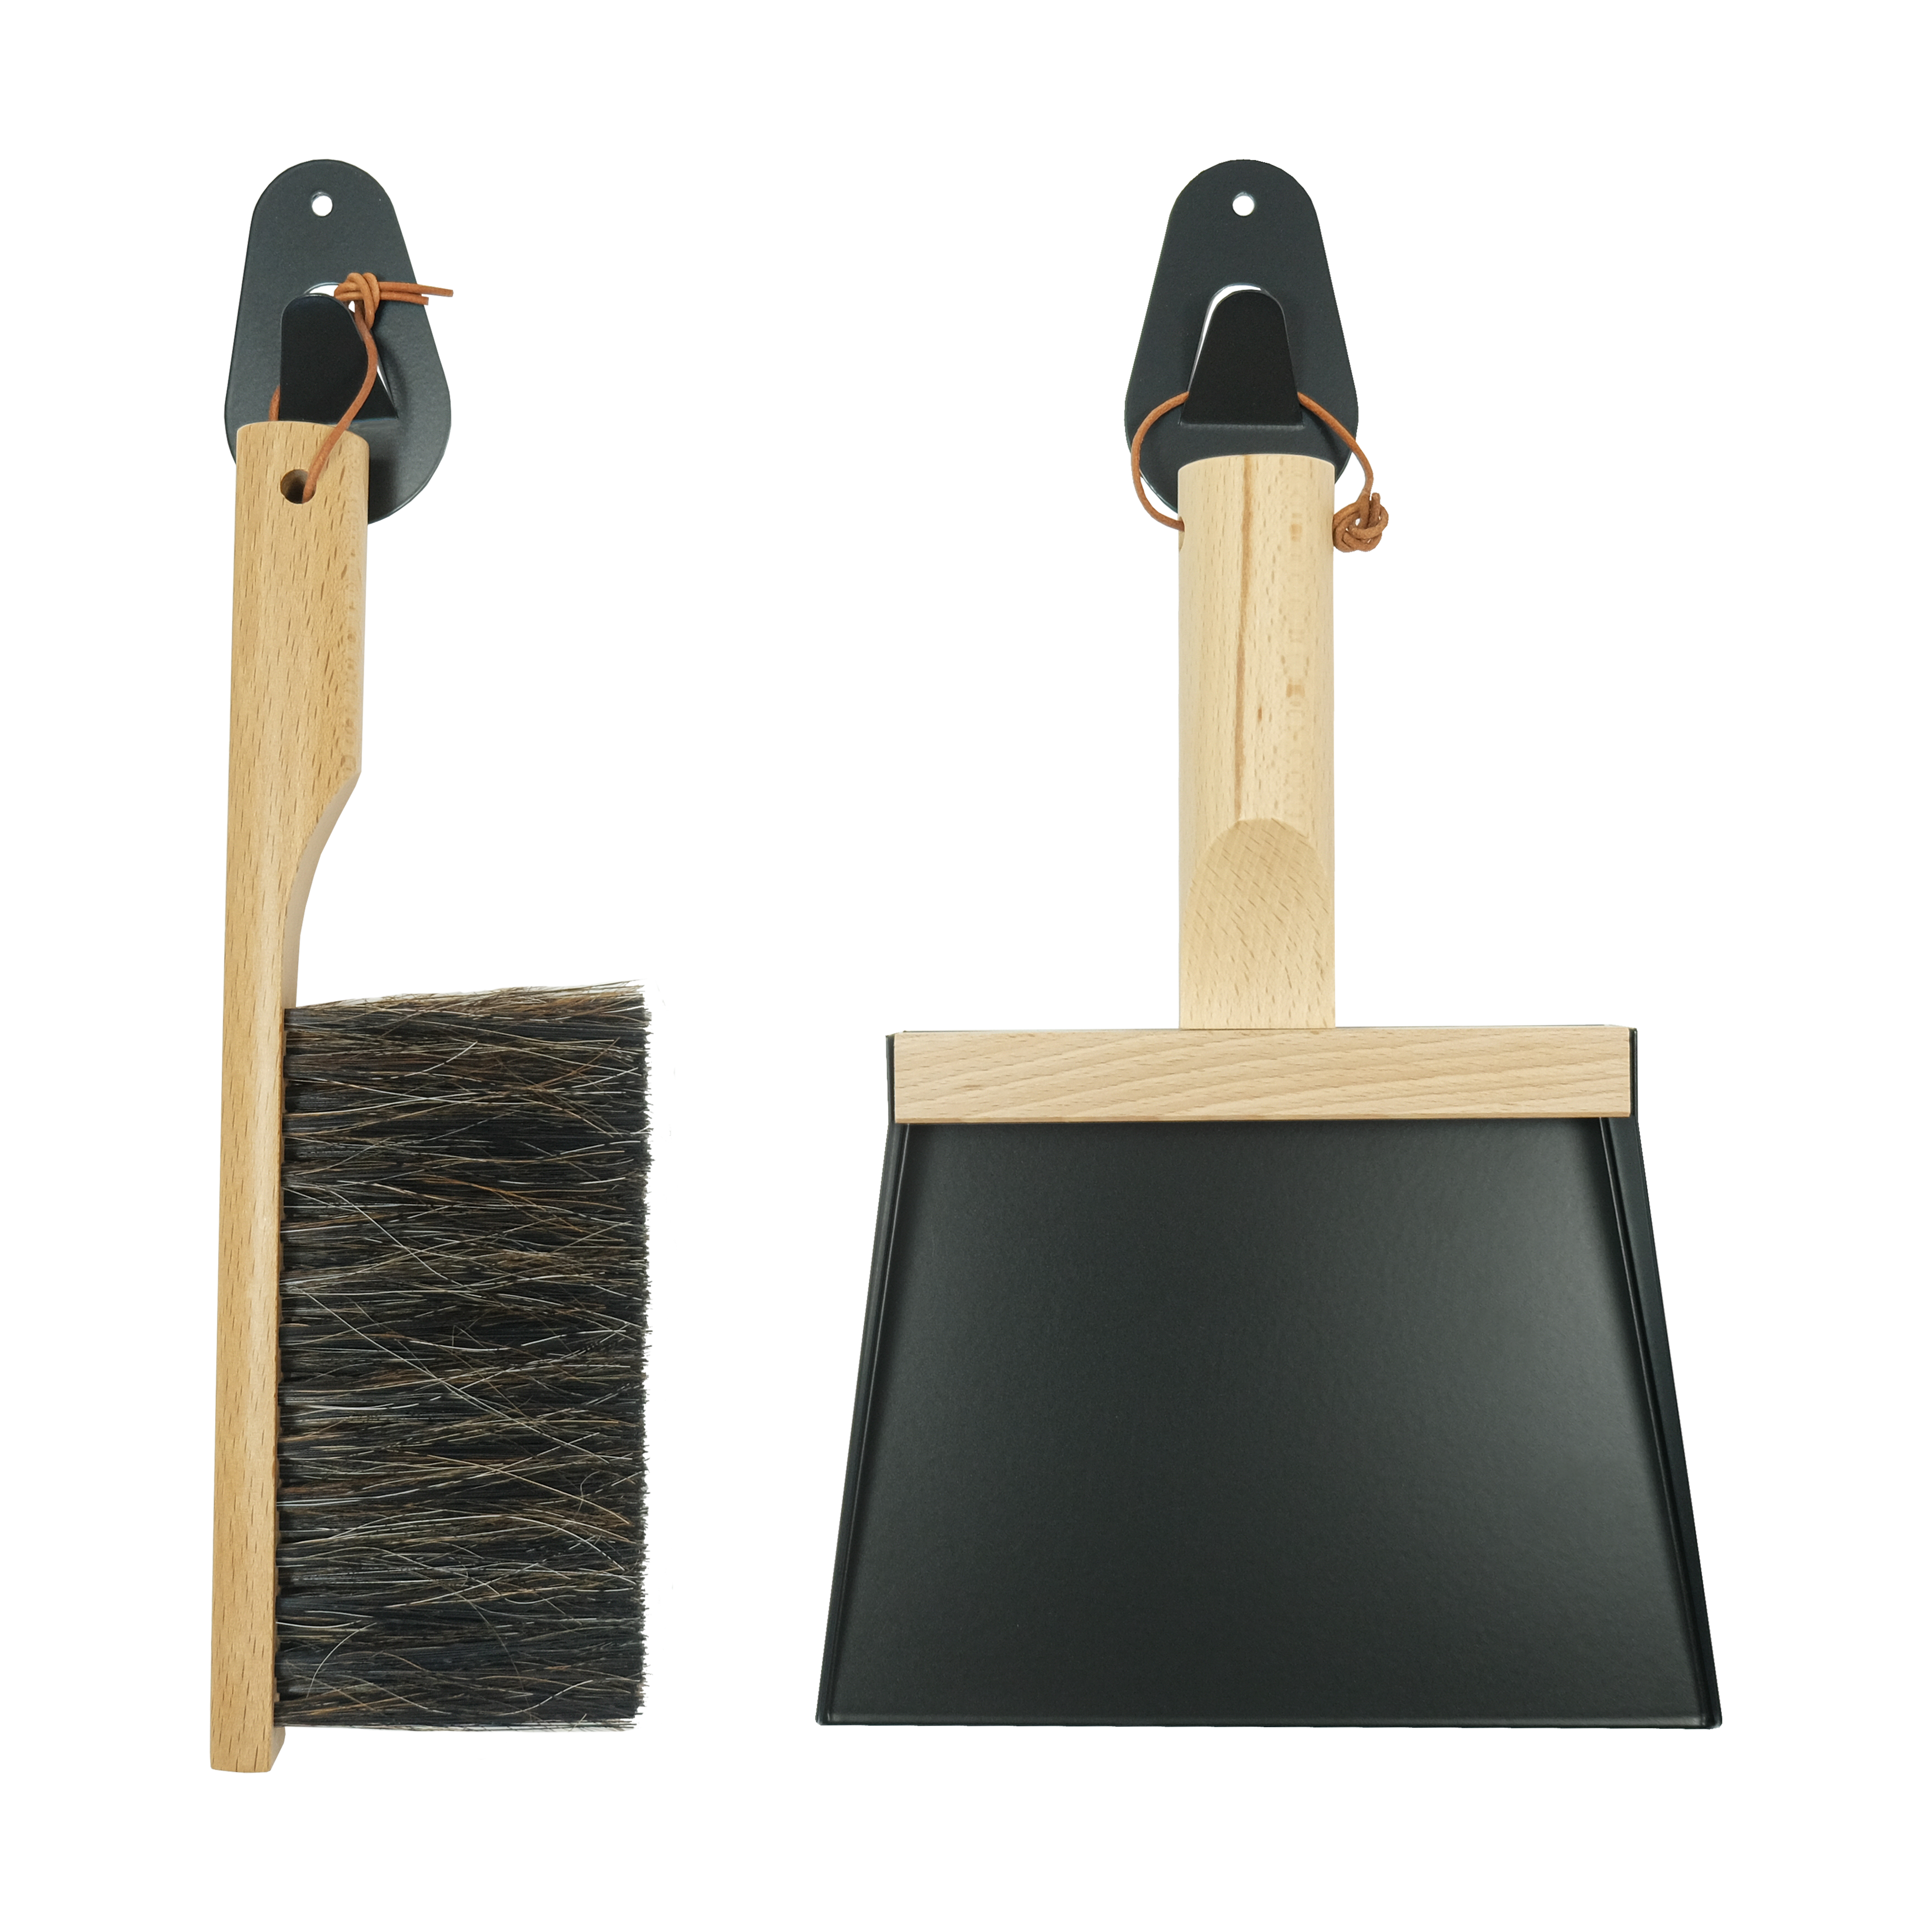 Andrée Jardin Mr. and Mrs. Clynk Dustpan & Brush "Coffret" Gift Set with Wall Hooks Black Utilities Andrée Jardin Brand_Andrée Jardin Home_Broom Sets Home_Household Cleaning New Arrivals coffret-crochets-pelle-balayette-clynk-3250-PNG